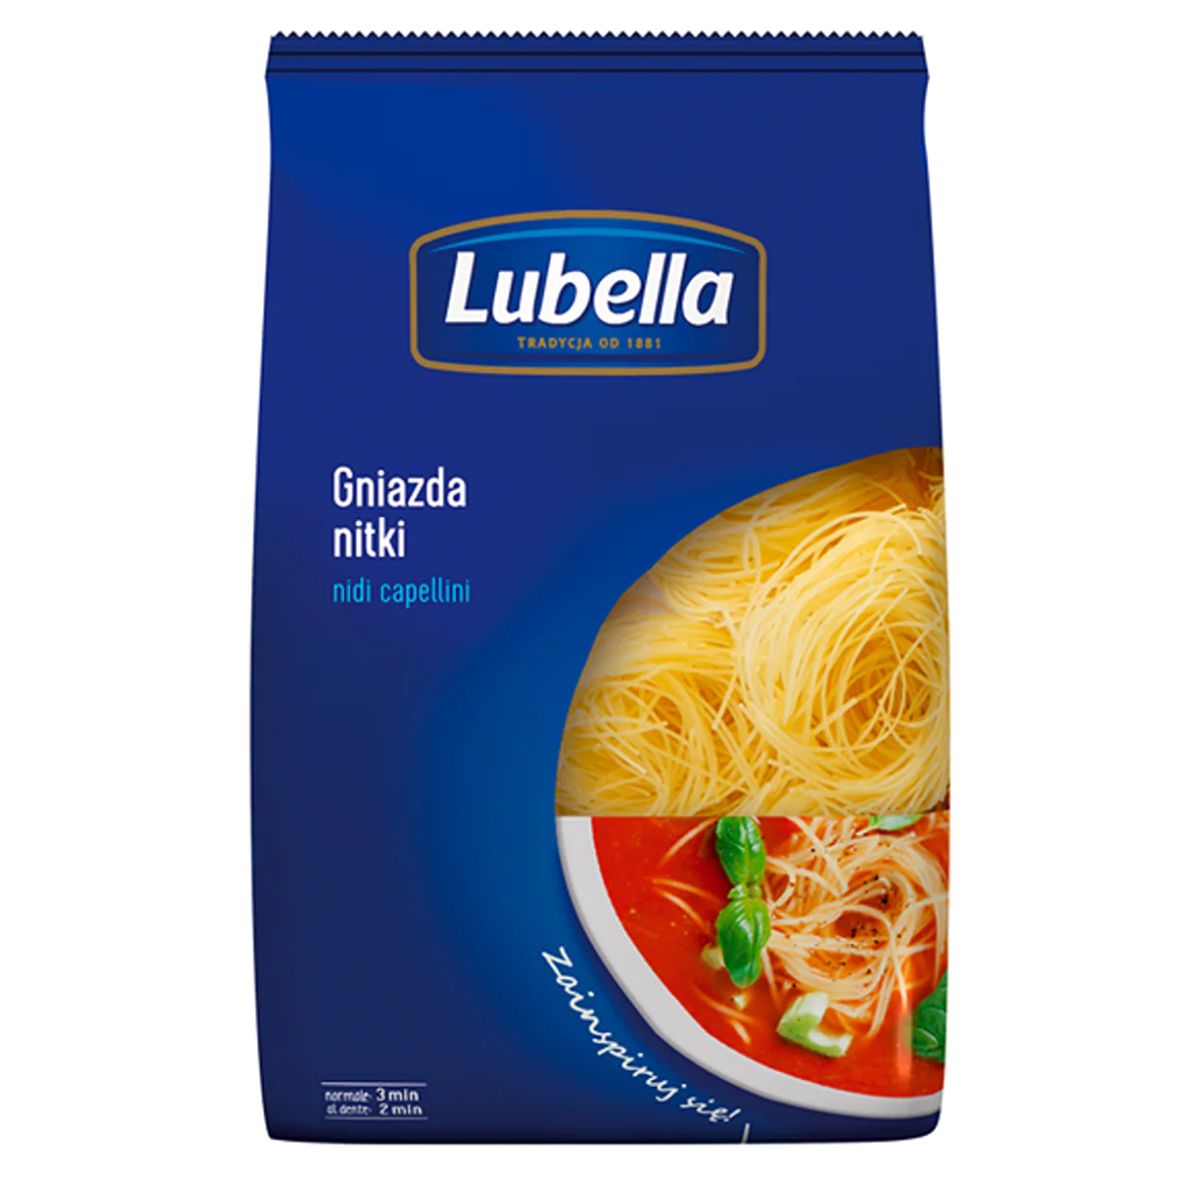 Package of Lubella - Pasta Nests - 400g.